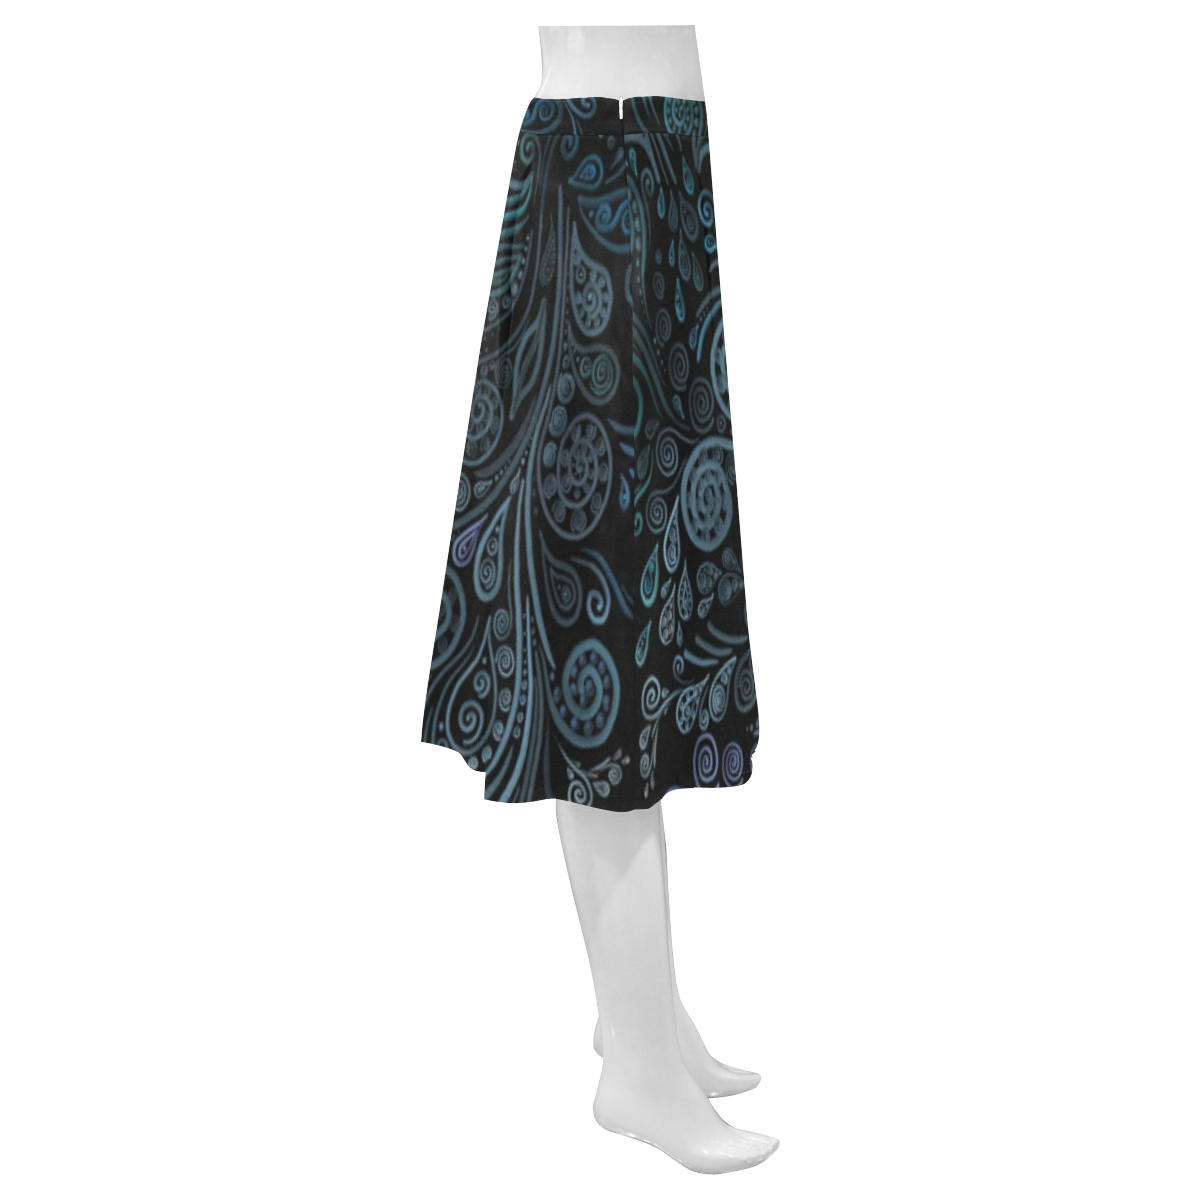 3D ornaments, psychedelic blue Mnemosyne Women's Crepe Skirt (Model D16)